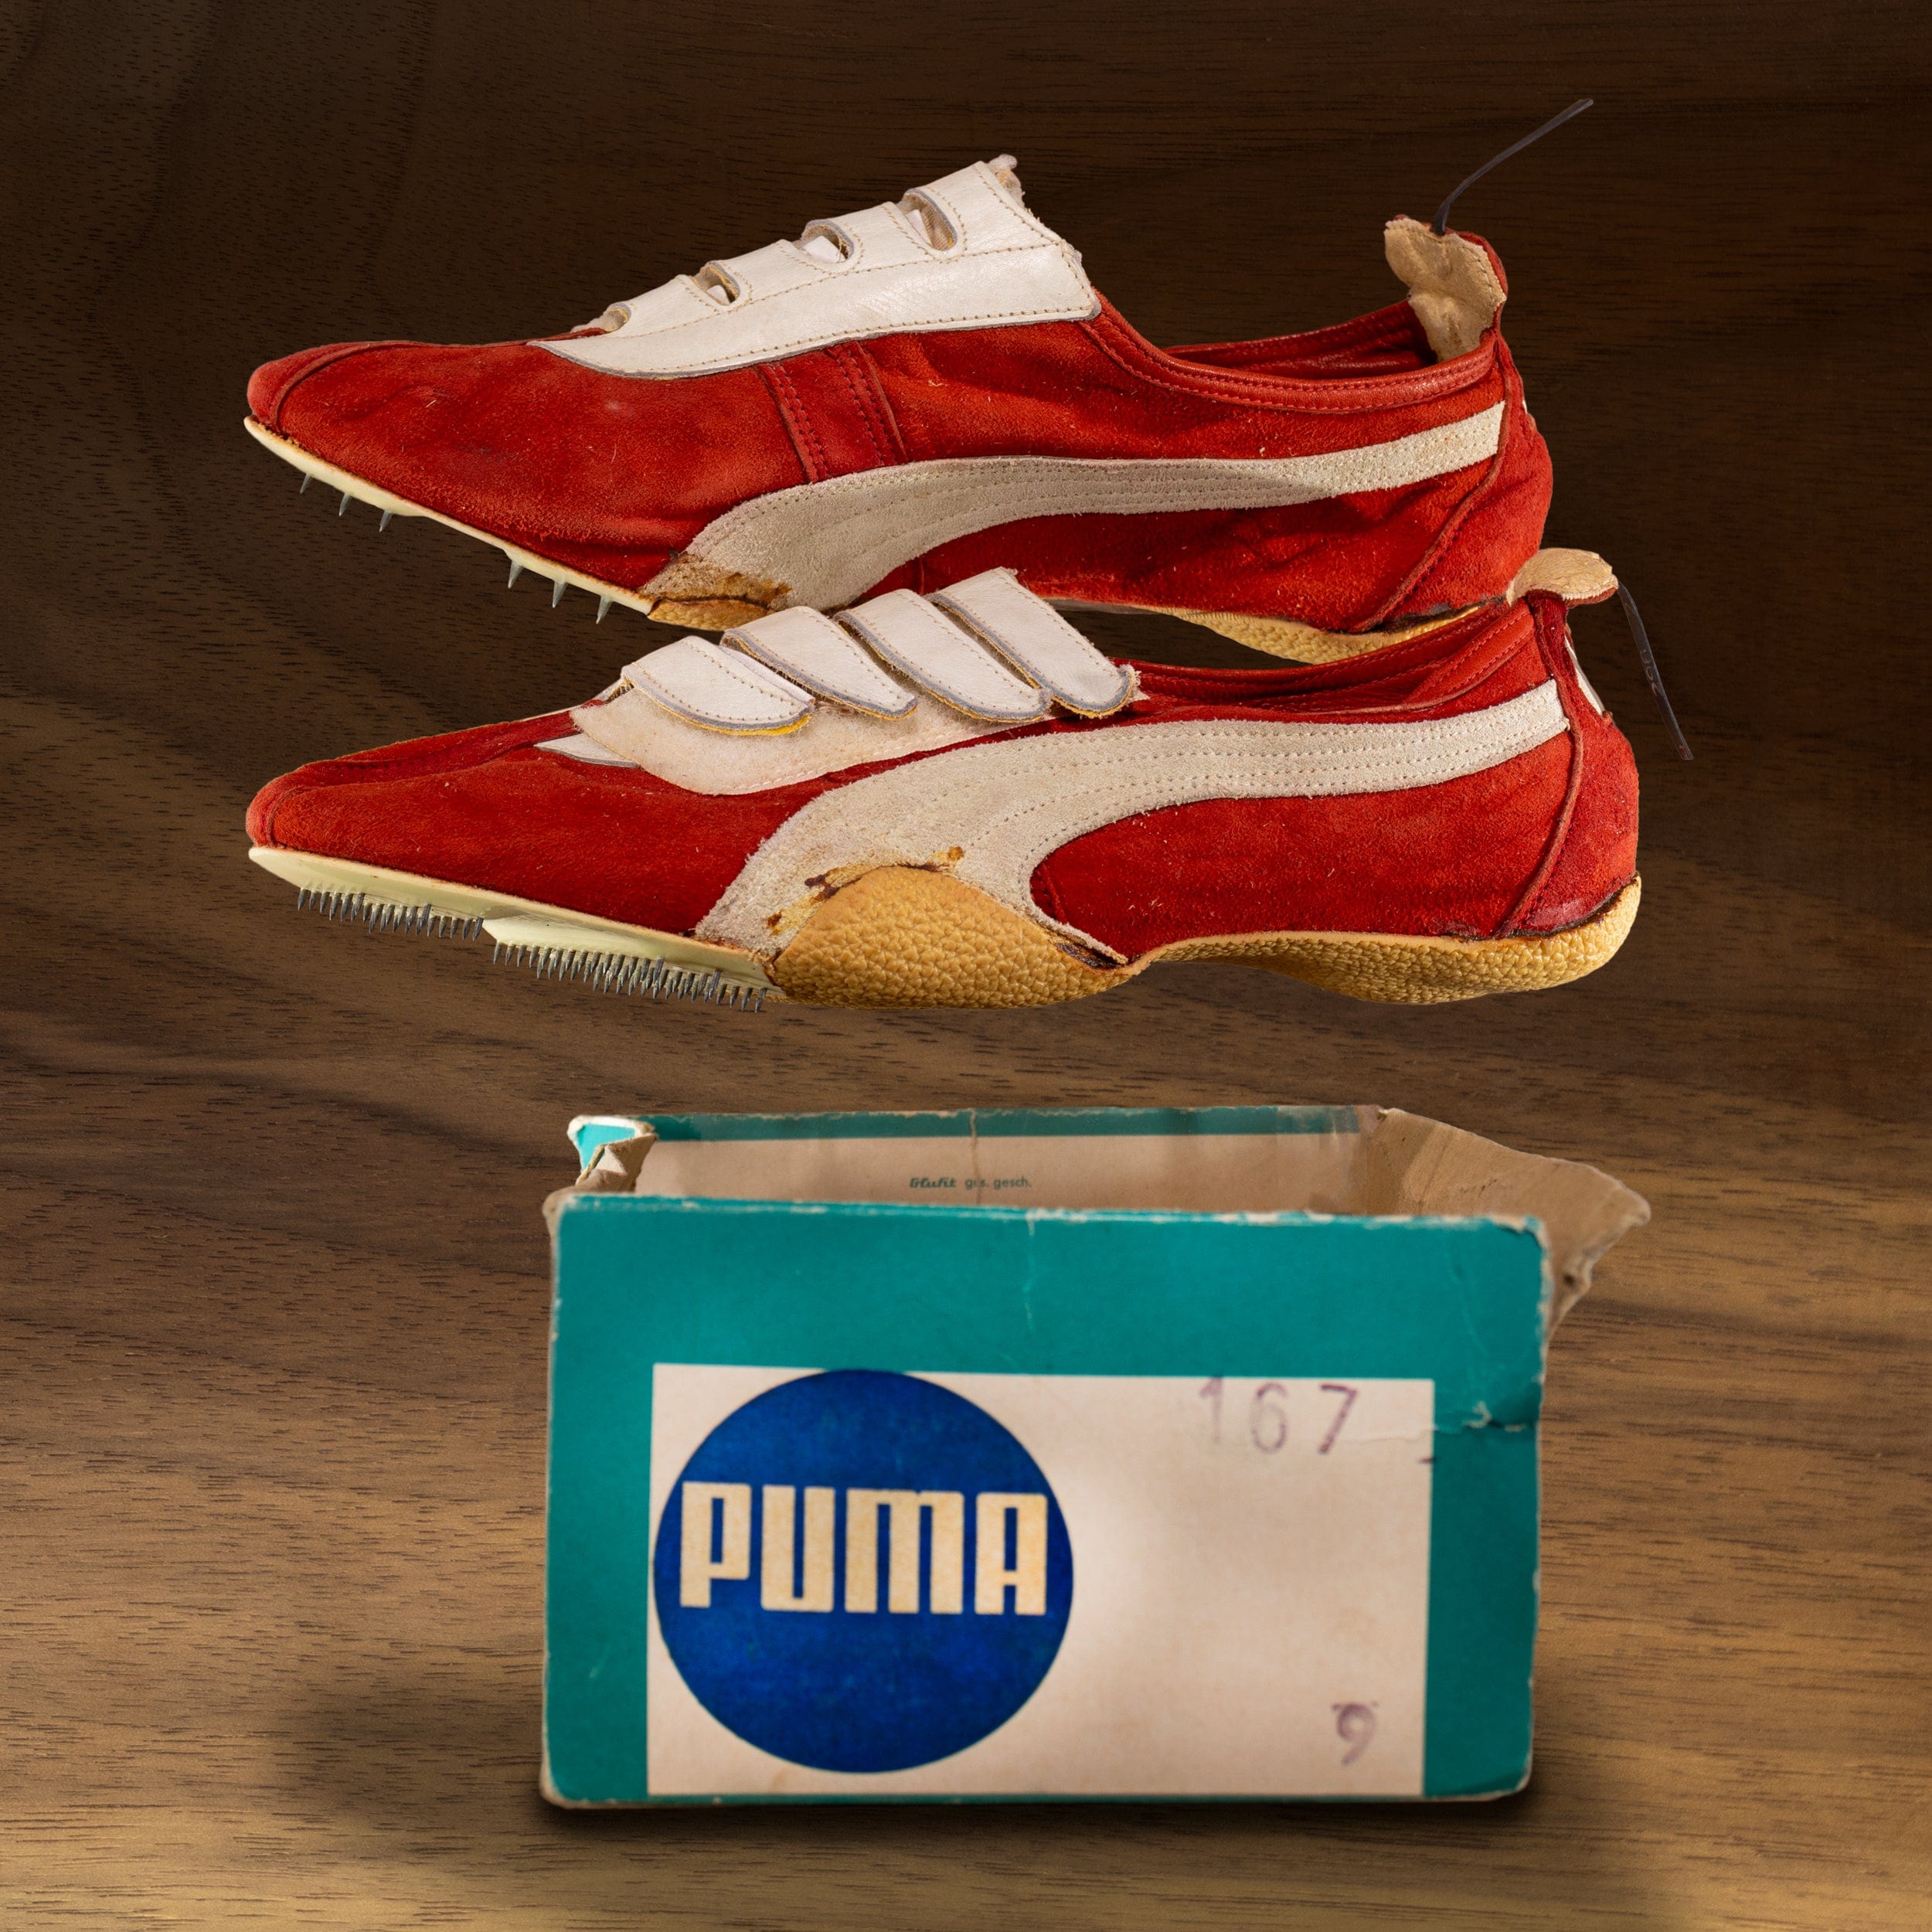 1968 Puma Olympic Track Shoe Set with banned "Brush" Shoes – Gold & Silver Shop